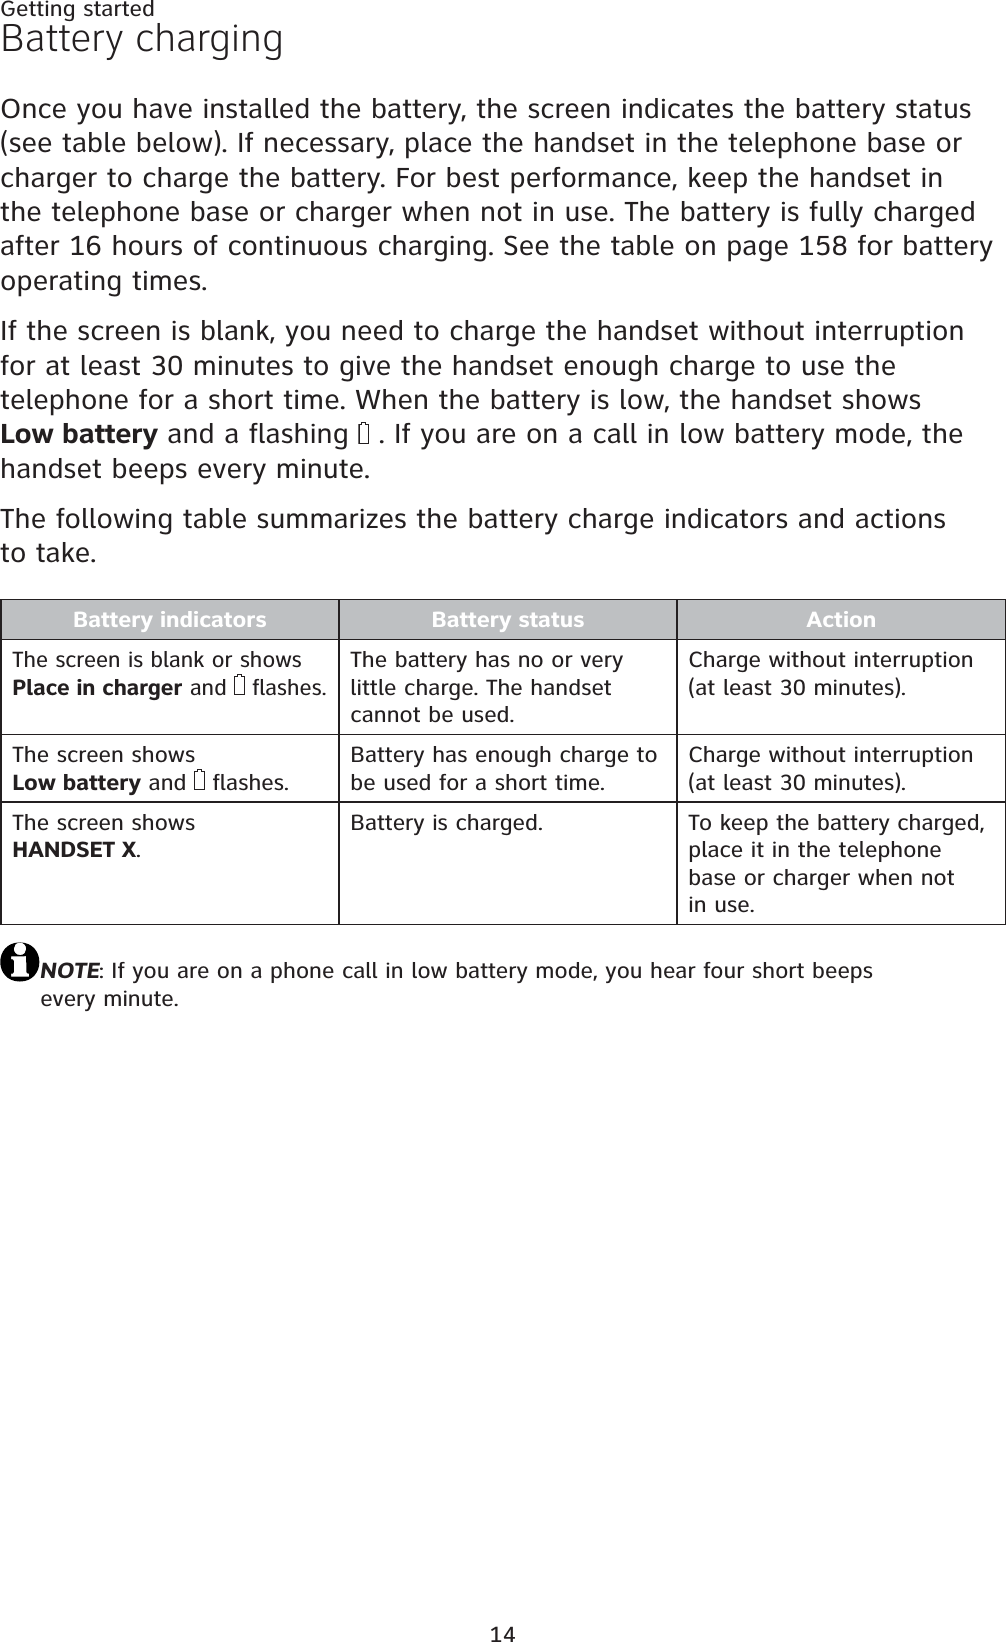 14Getting startedBattery chargingOnce you have installed the battery, the screen indicates the battery status (see table below). If necessary, place the handset in the telephone base or charger to charge the battery. For best performance, keep the handset in the telephone base or charger when not in use. The battery is fully charged after 16 hours of continuous charging. See the table on page 158 for battery operating times.If the screen is blank, you need to charge the handset without interruption for at least 30 minutes to give the handset enough charge to use the telephone for a short time. When the battery is low, the handset shows Low battery and a flashing  . If you are on a call in low battery mode, the handset beeps every minute.The following table summarizes the battery charge indicators and actionsto take.Battery indicators Battery status ActionThe screen is blank or shows Place in charger and   flashes.The battery has no or very little charge. The handset cannot be used.Charge without interruption (at least 30 minutes).The screen shows Low battery and   flashes.Battery has enough charge to be used for a short time.Charge without interruption (at least 30 minutes).The screen shows HANDSET X.Battery is charged. To keep the battery charged, place it in the telephone base or charger when not in use.NOTE: If you are on a phone call in low battery mode, you hear four short beeps every minute.